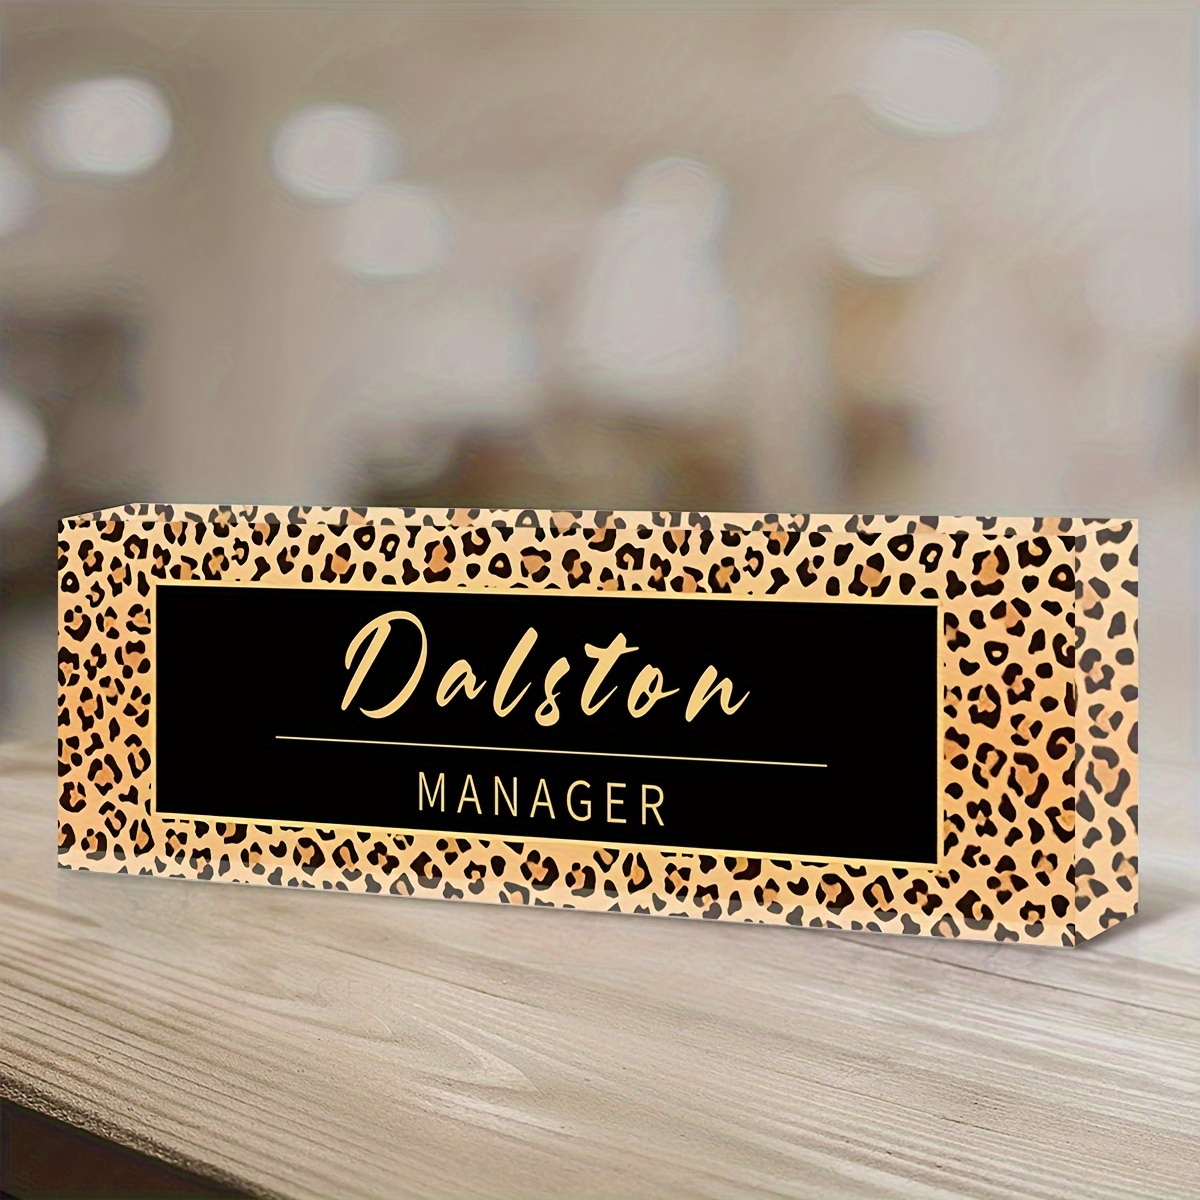 

1pc Customized Desk Name Plate Personalized Name Tag, Desk Decorations For Office, Acrylic Desk Name Plate, Customized Gift (leopard Print)